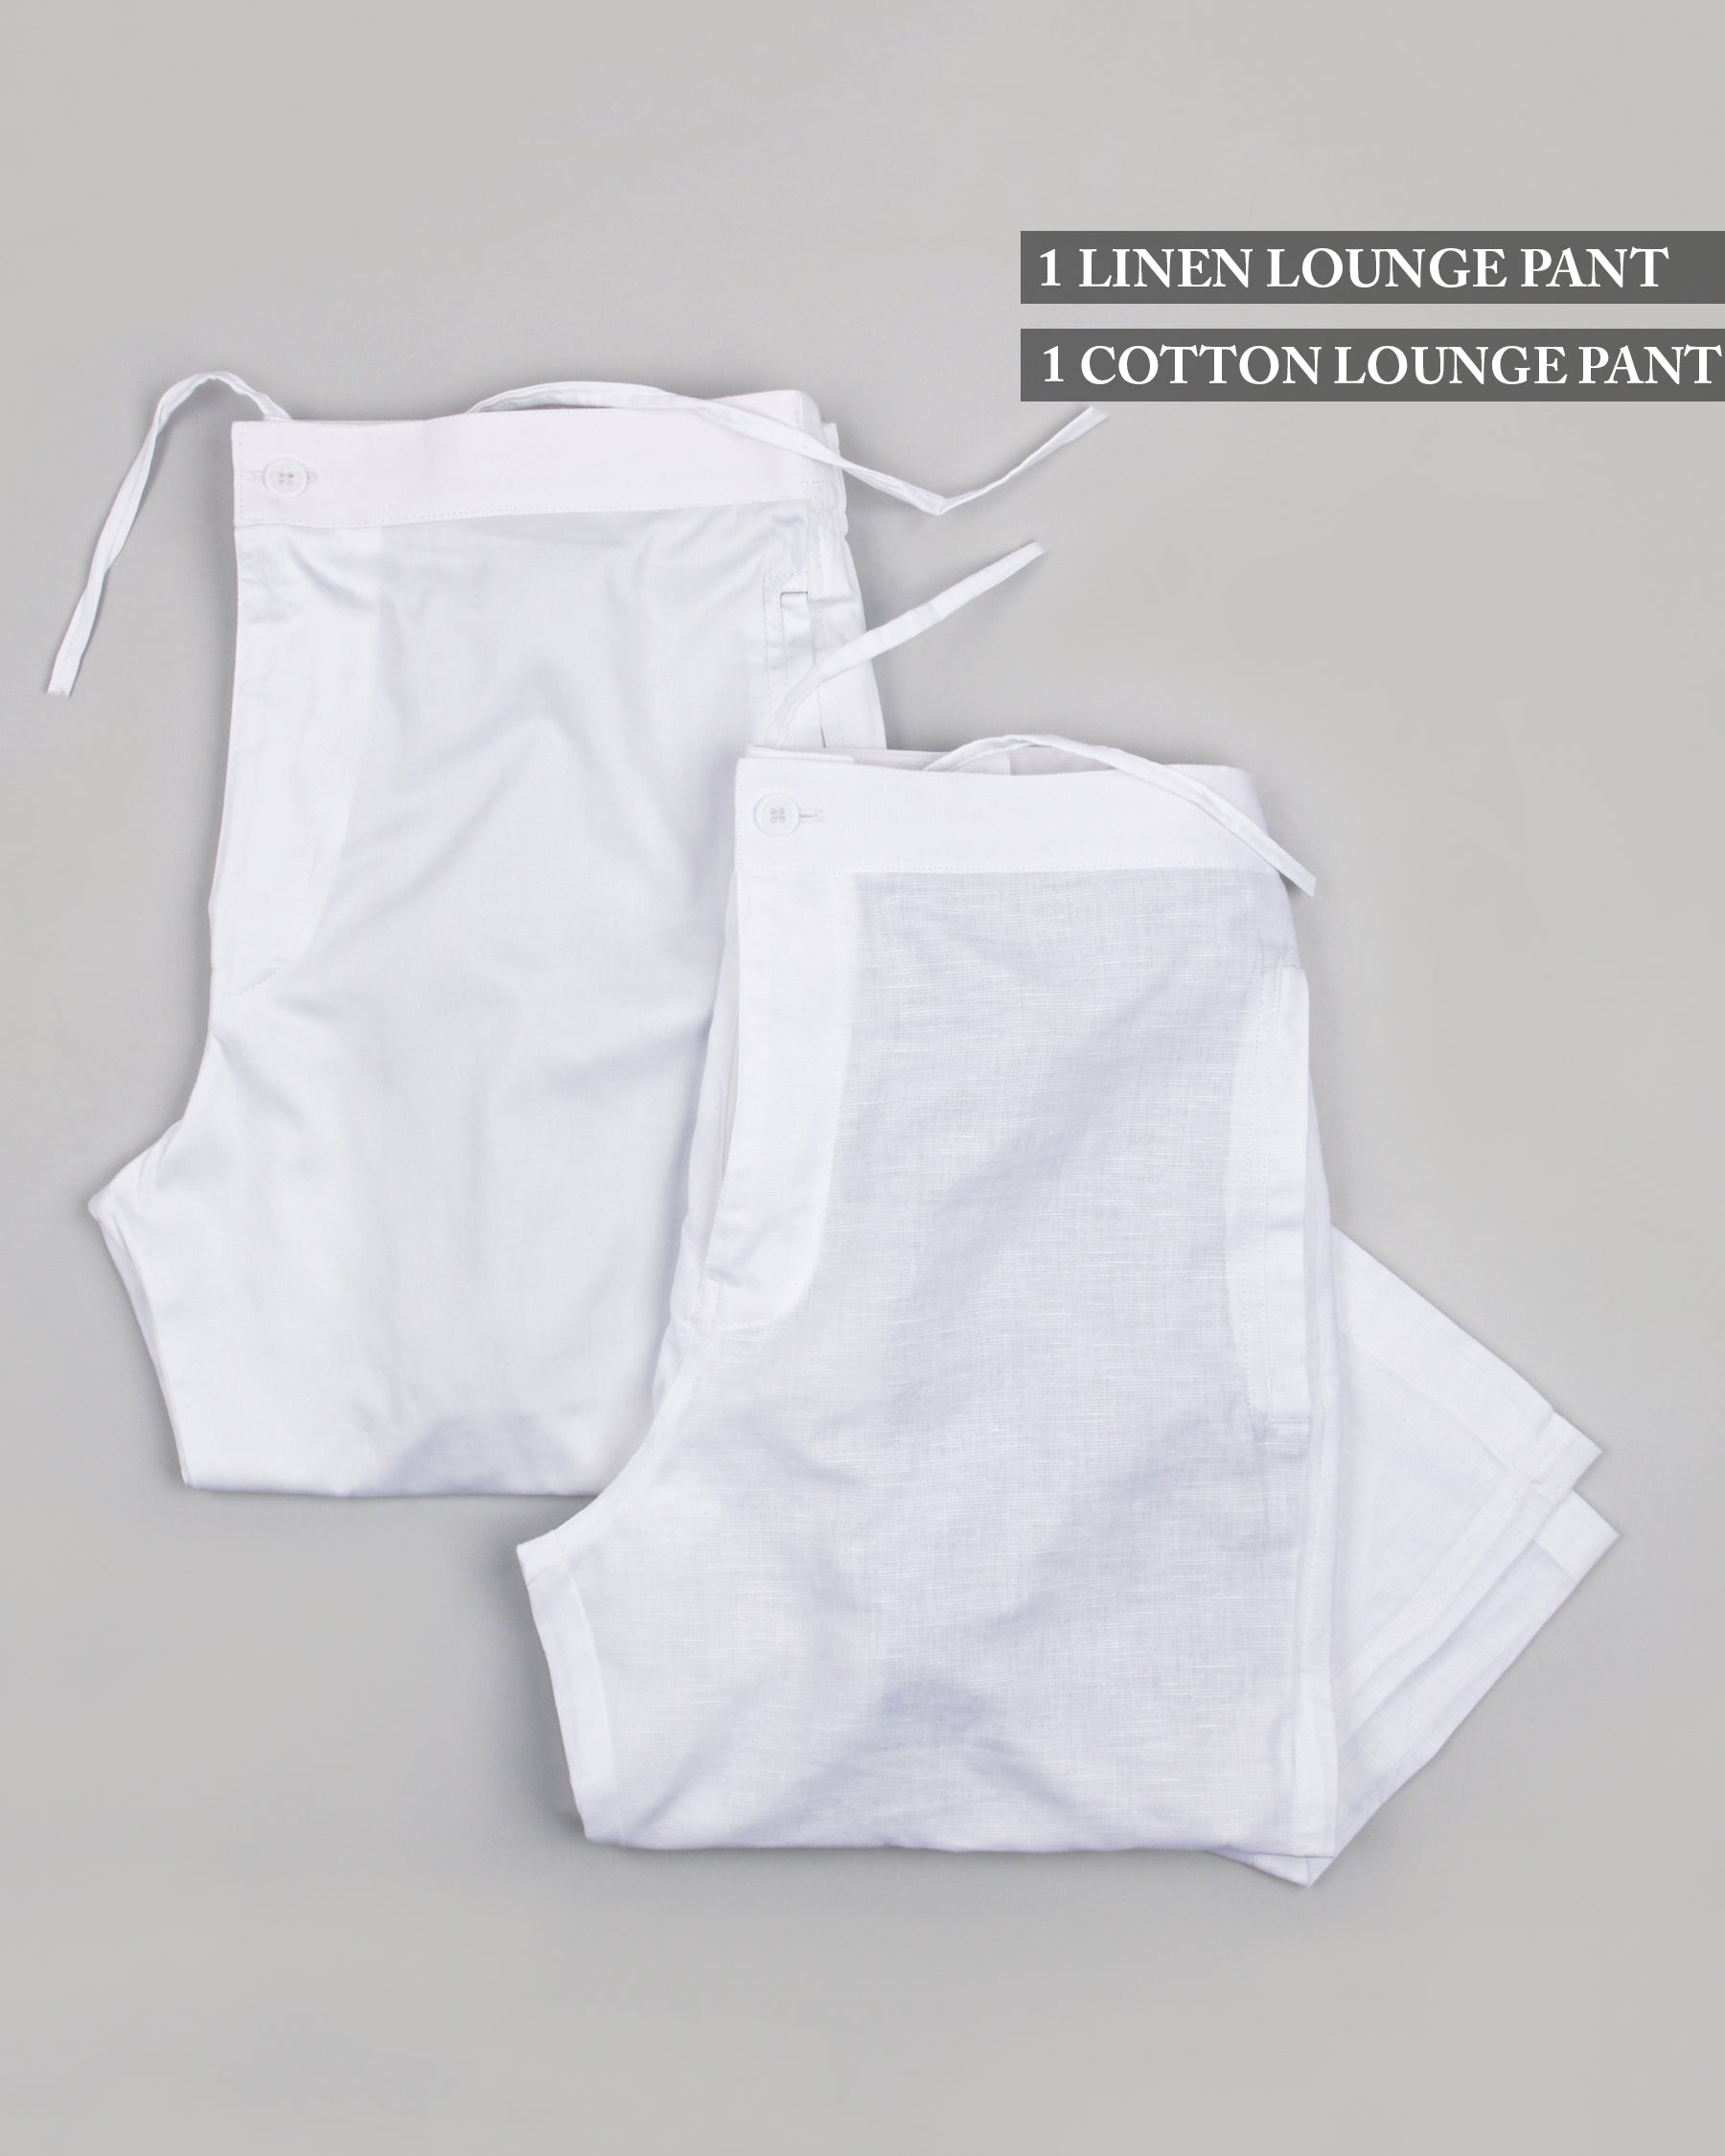 One white Cotton and One White Linen Lounge Pants LP014-34, LP014-42, LP014-44, LP014-32, LP014-30, LP014-28, LP014-38, LP014-40, LP014-36